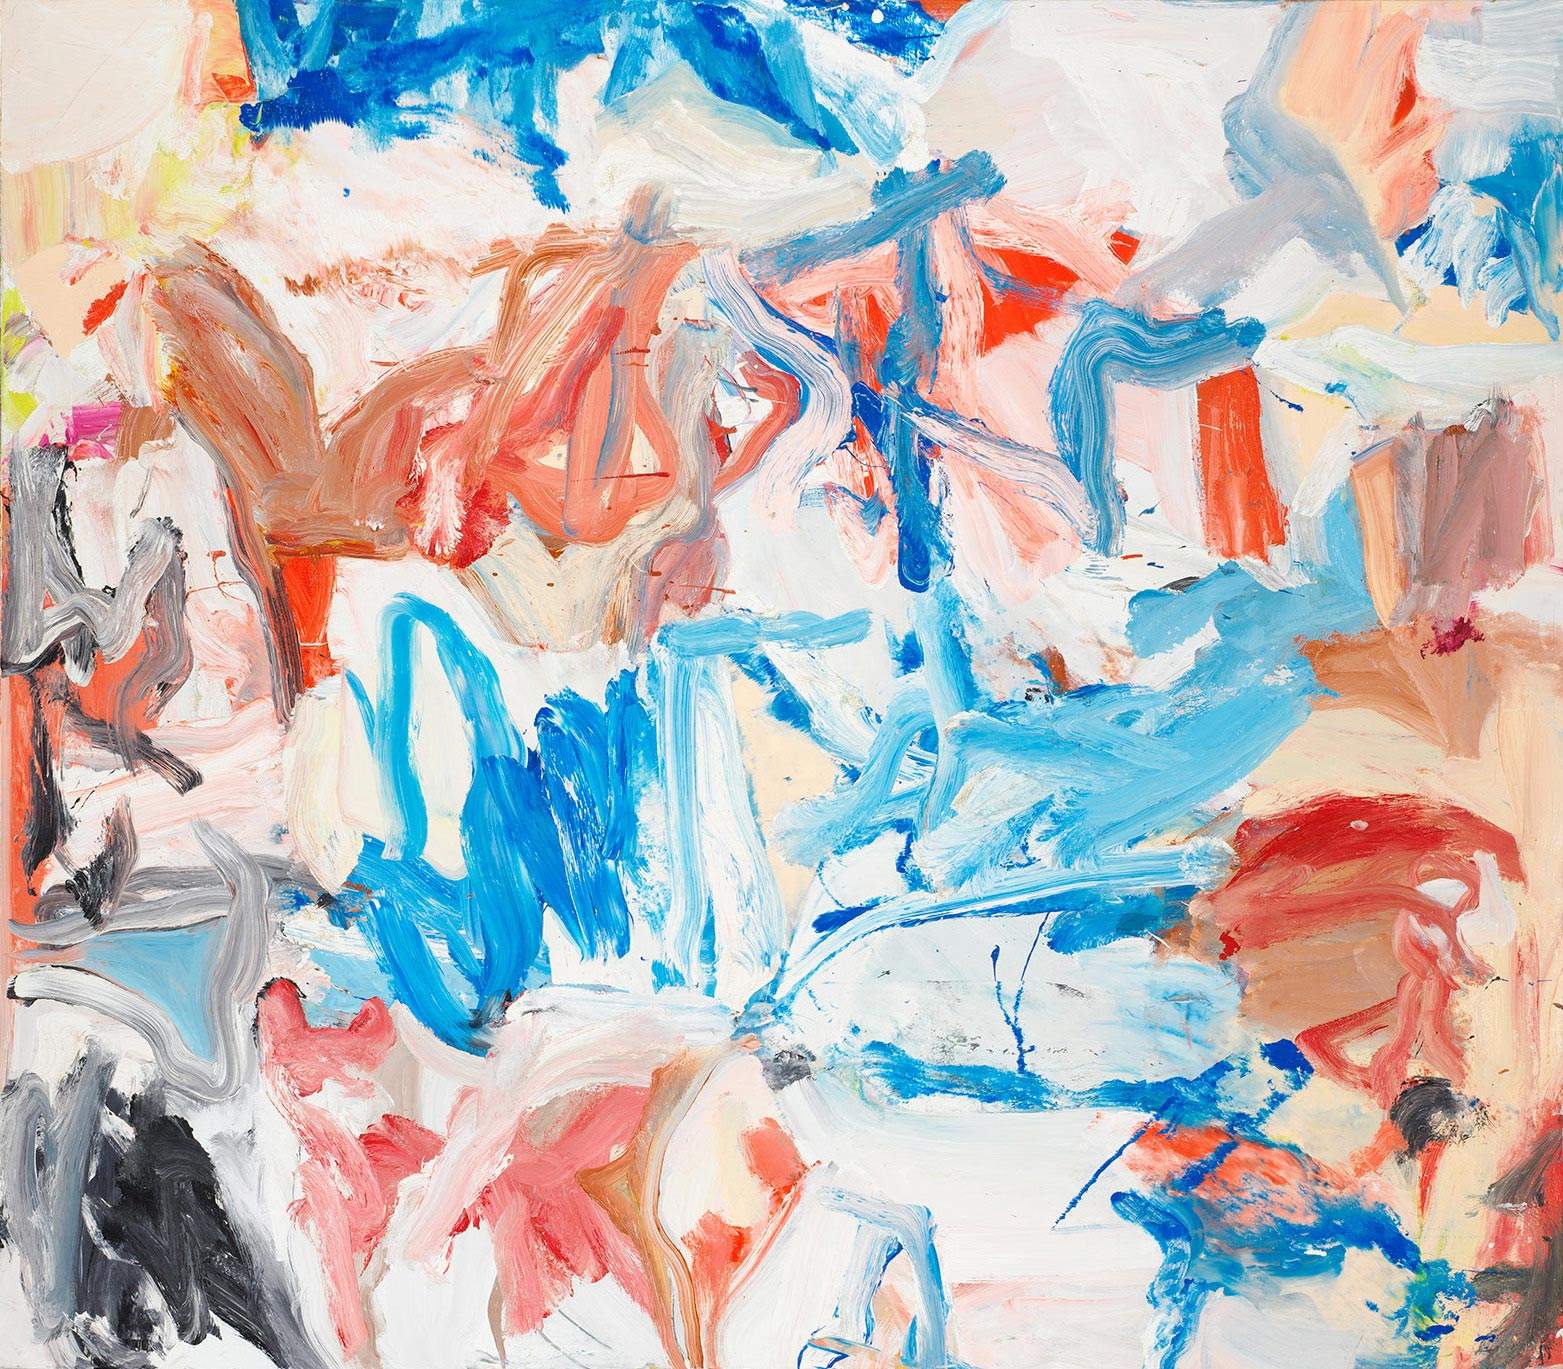 Venice, for the first time an exhibition on Willem de Kooning's Italian sojourns